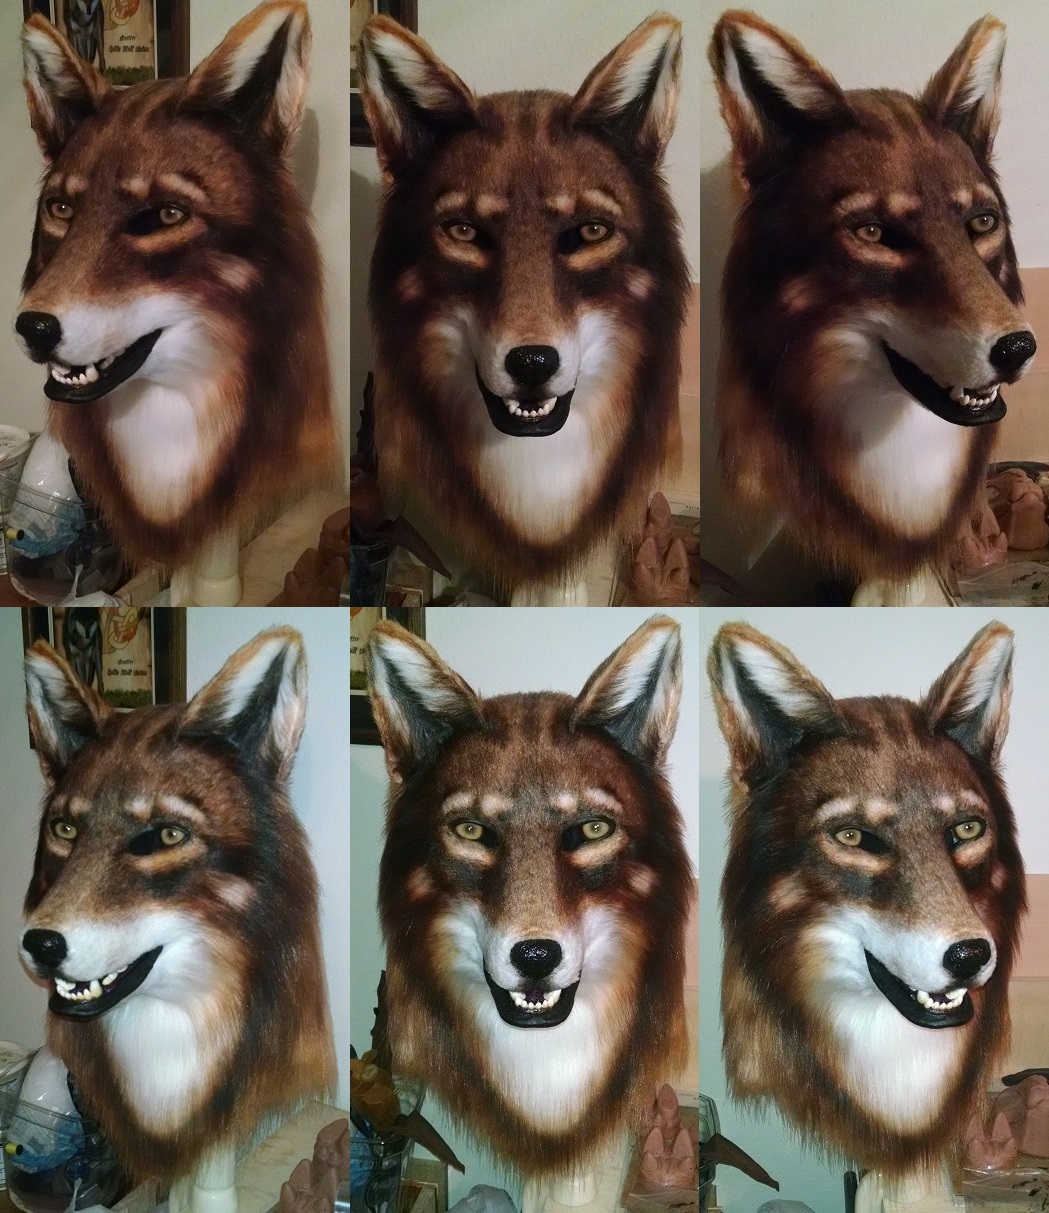 Fluffy Red Wolf Mask